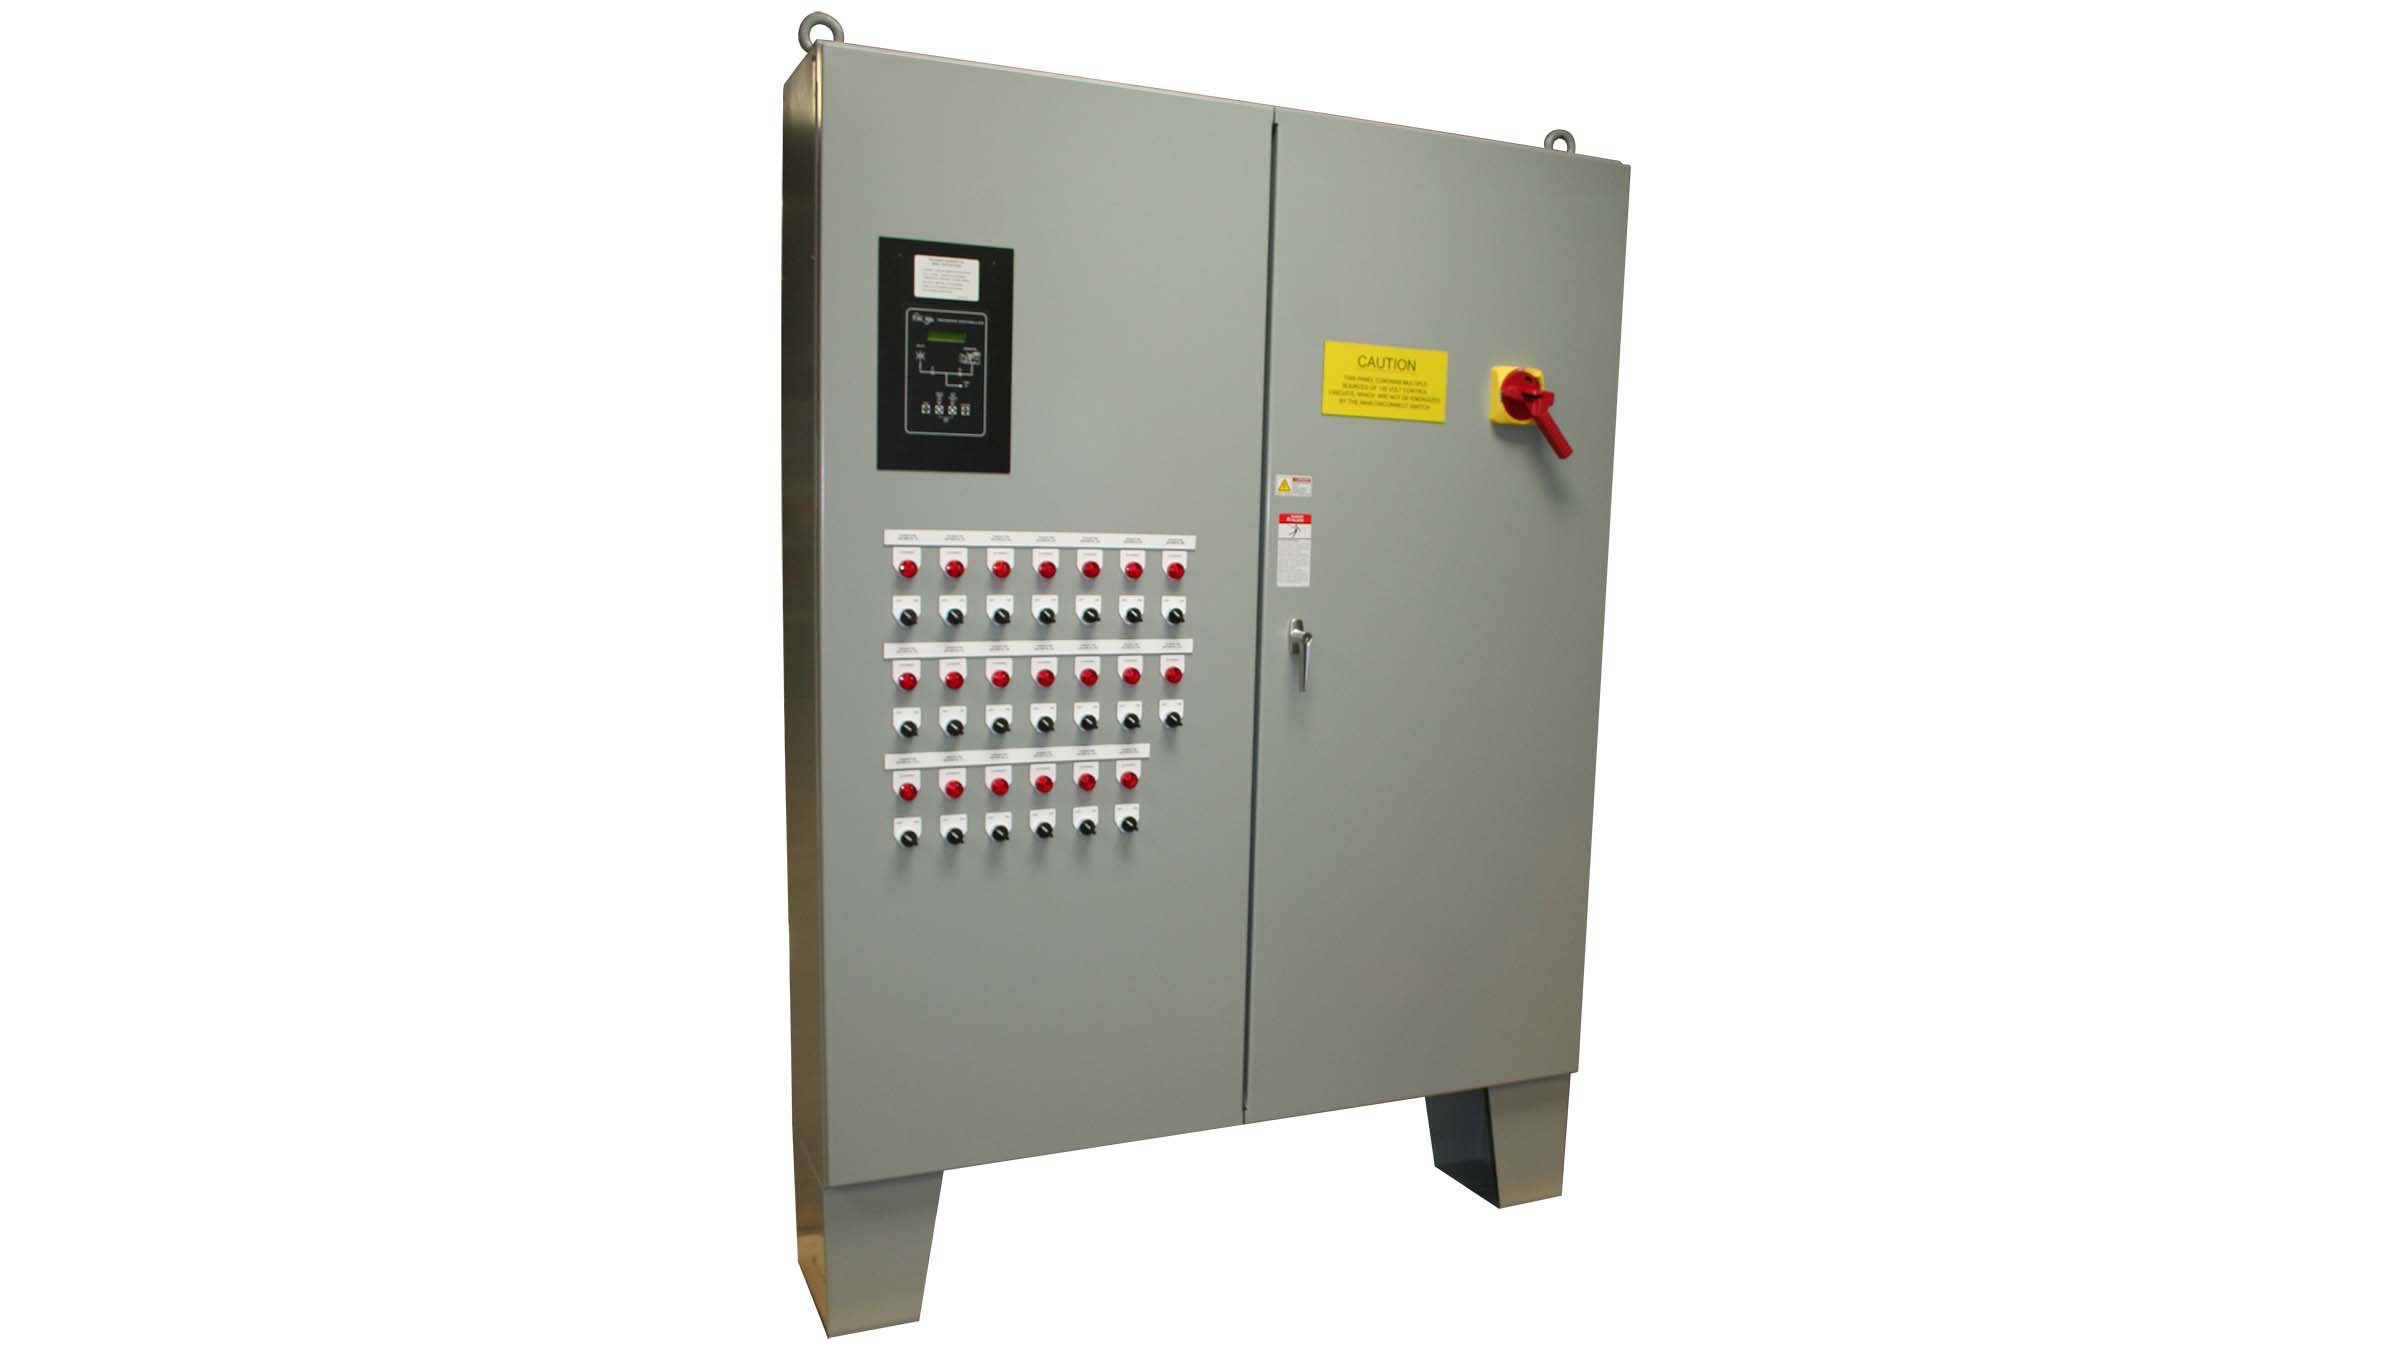 Control Solutions multi-softstarter control panel for controlling factory exhaust fans